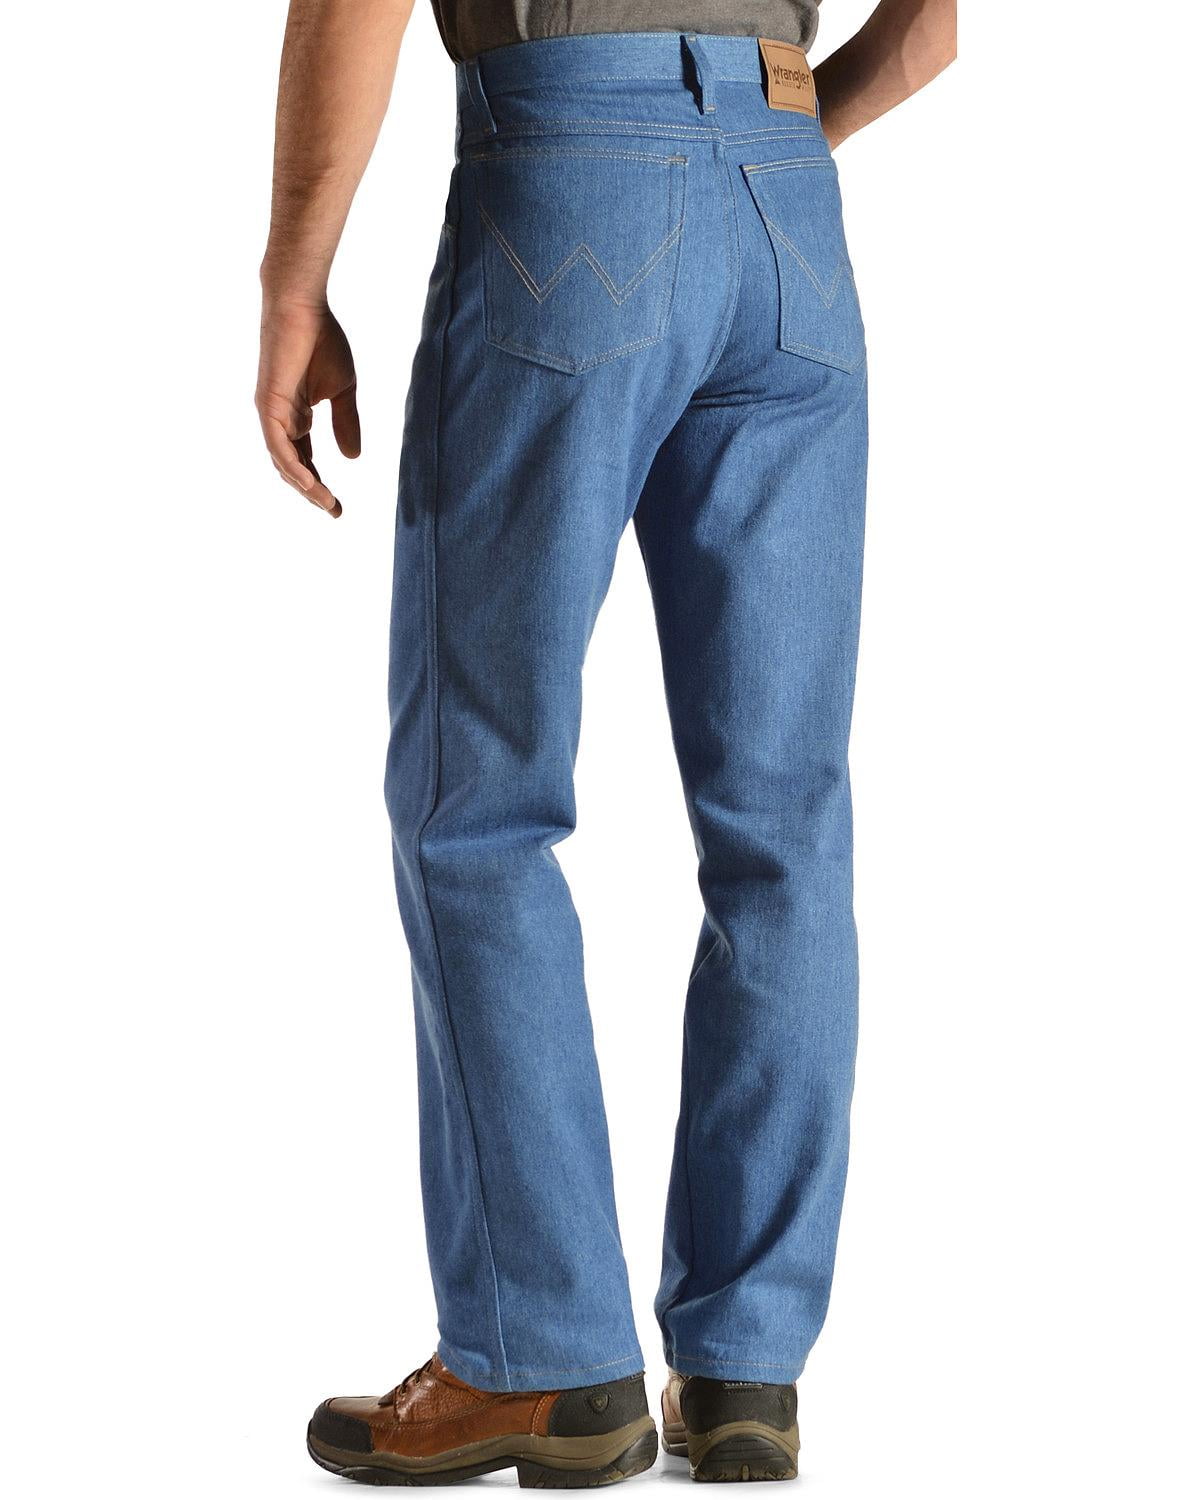 wrangler rugged wear jeans classic fit